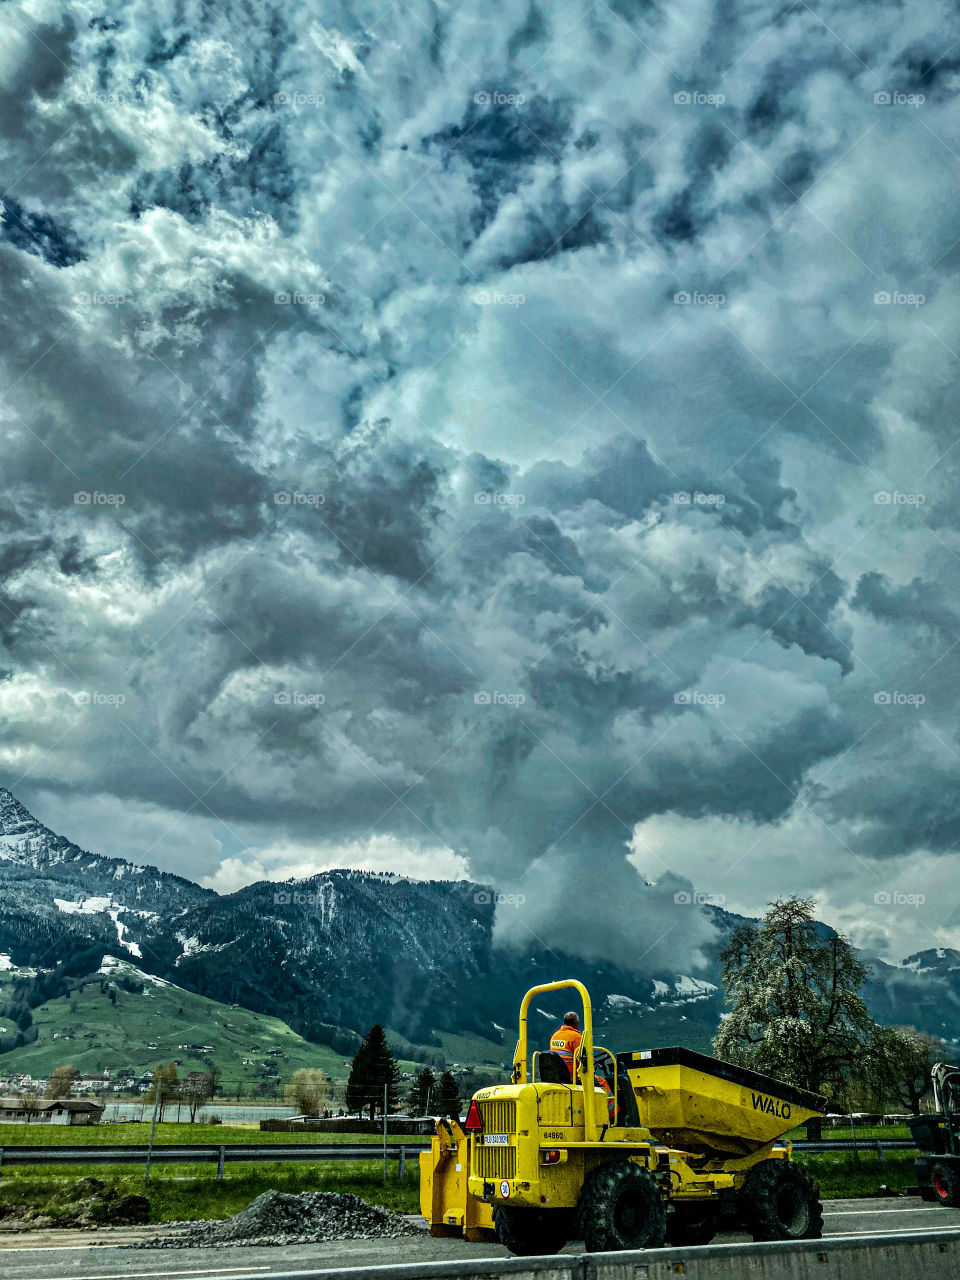 Swiss beauties, Swiss mountains, clouds floating over the Alps, railway, stop, bus, beautiful painted building, road